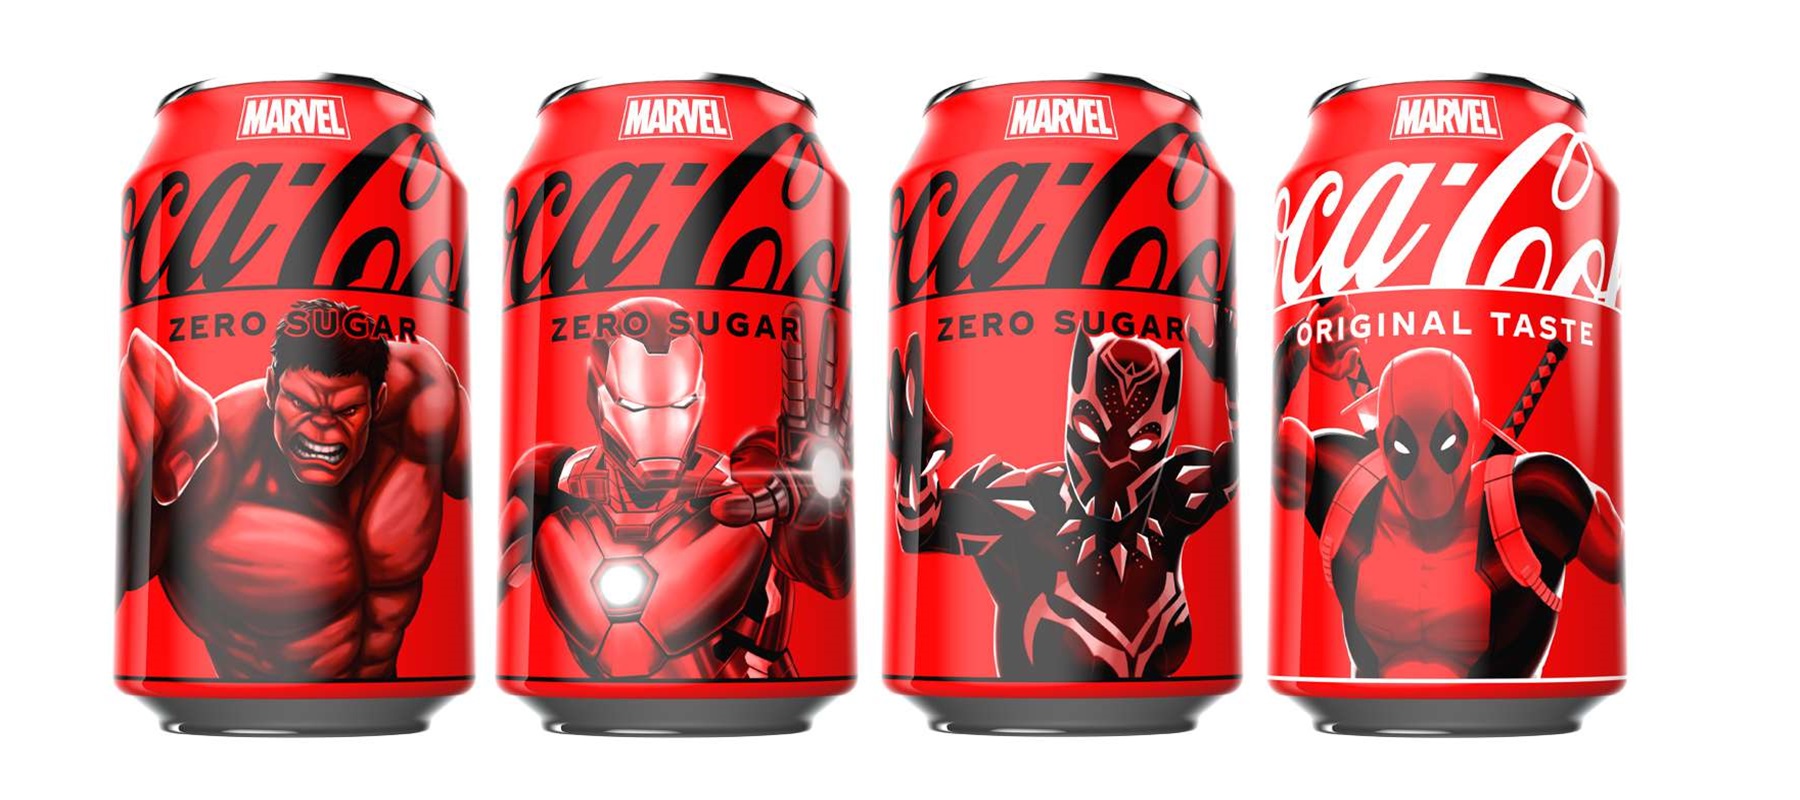 Coca Cola and Marvel tap augmented reality in new packaging and storytelling campaign